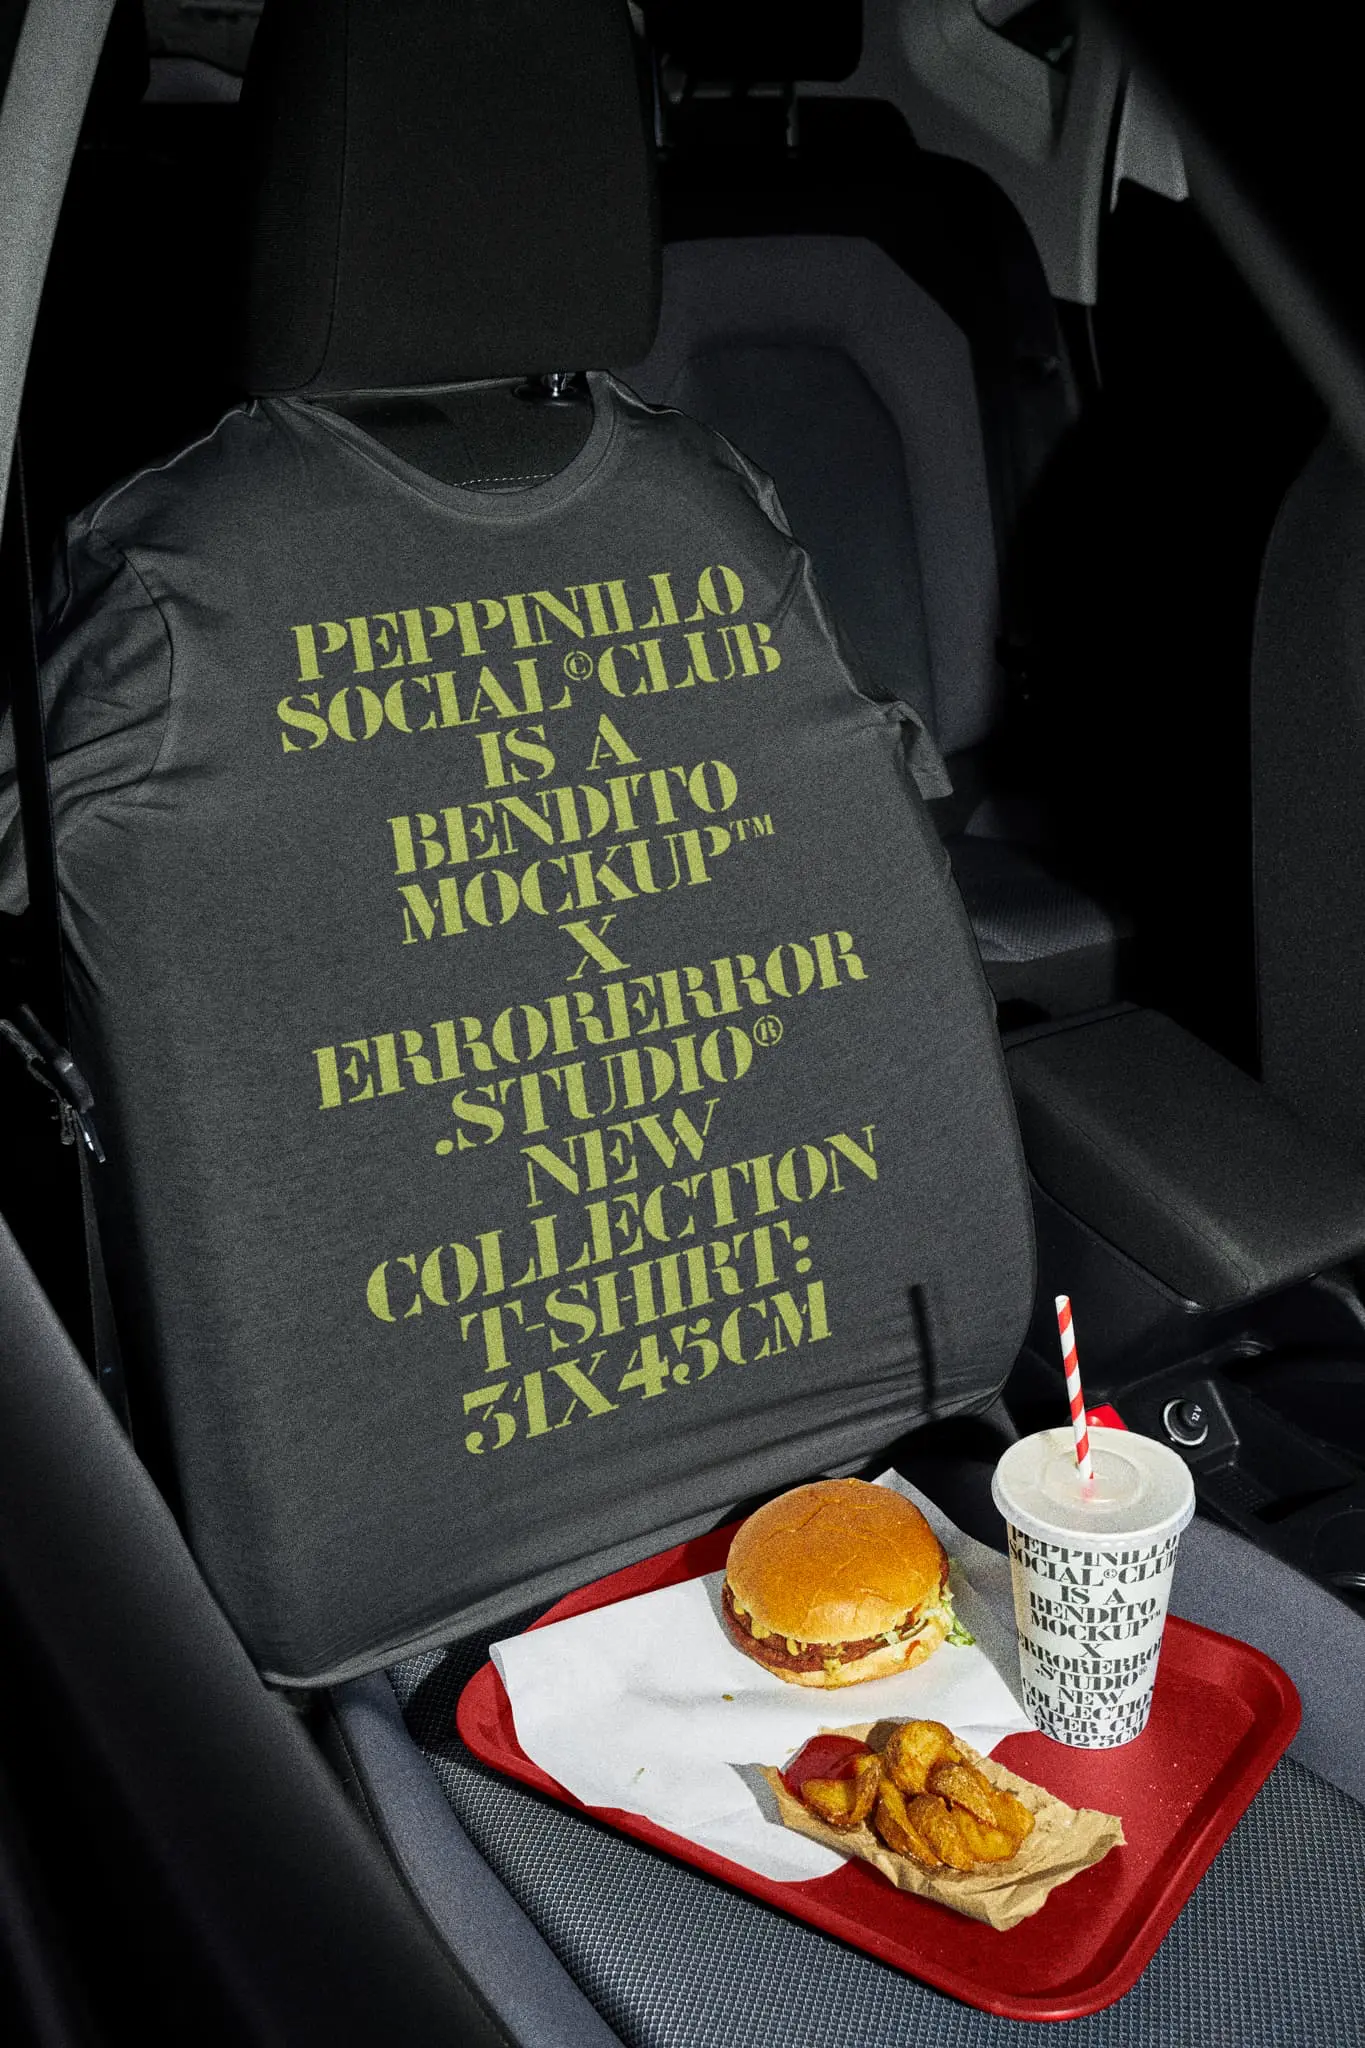 T-shirt mockup placed in the seat of a car that is in a take-away restaurant with a disposable paper cup mockup which is on a blue tray with a burger menu with fries on top of the car seat. Clothing mockup. Tee mockup. Takeaway PSD file. Takeaway mockup. Drink mockup. Paper cup mockup. Fast food mockup. Premium quality t-shirt mockup. Takeaway PSD high-quality editable file. Paper cup high-quality mockup.